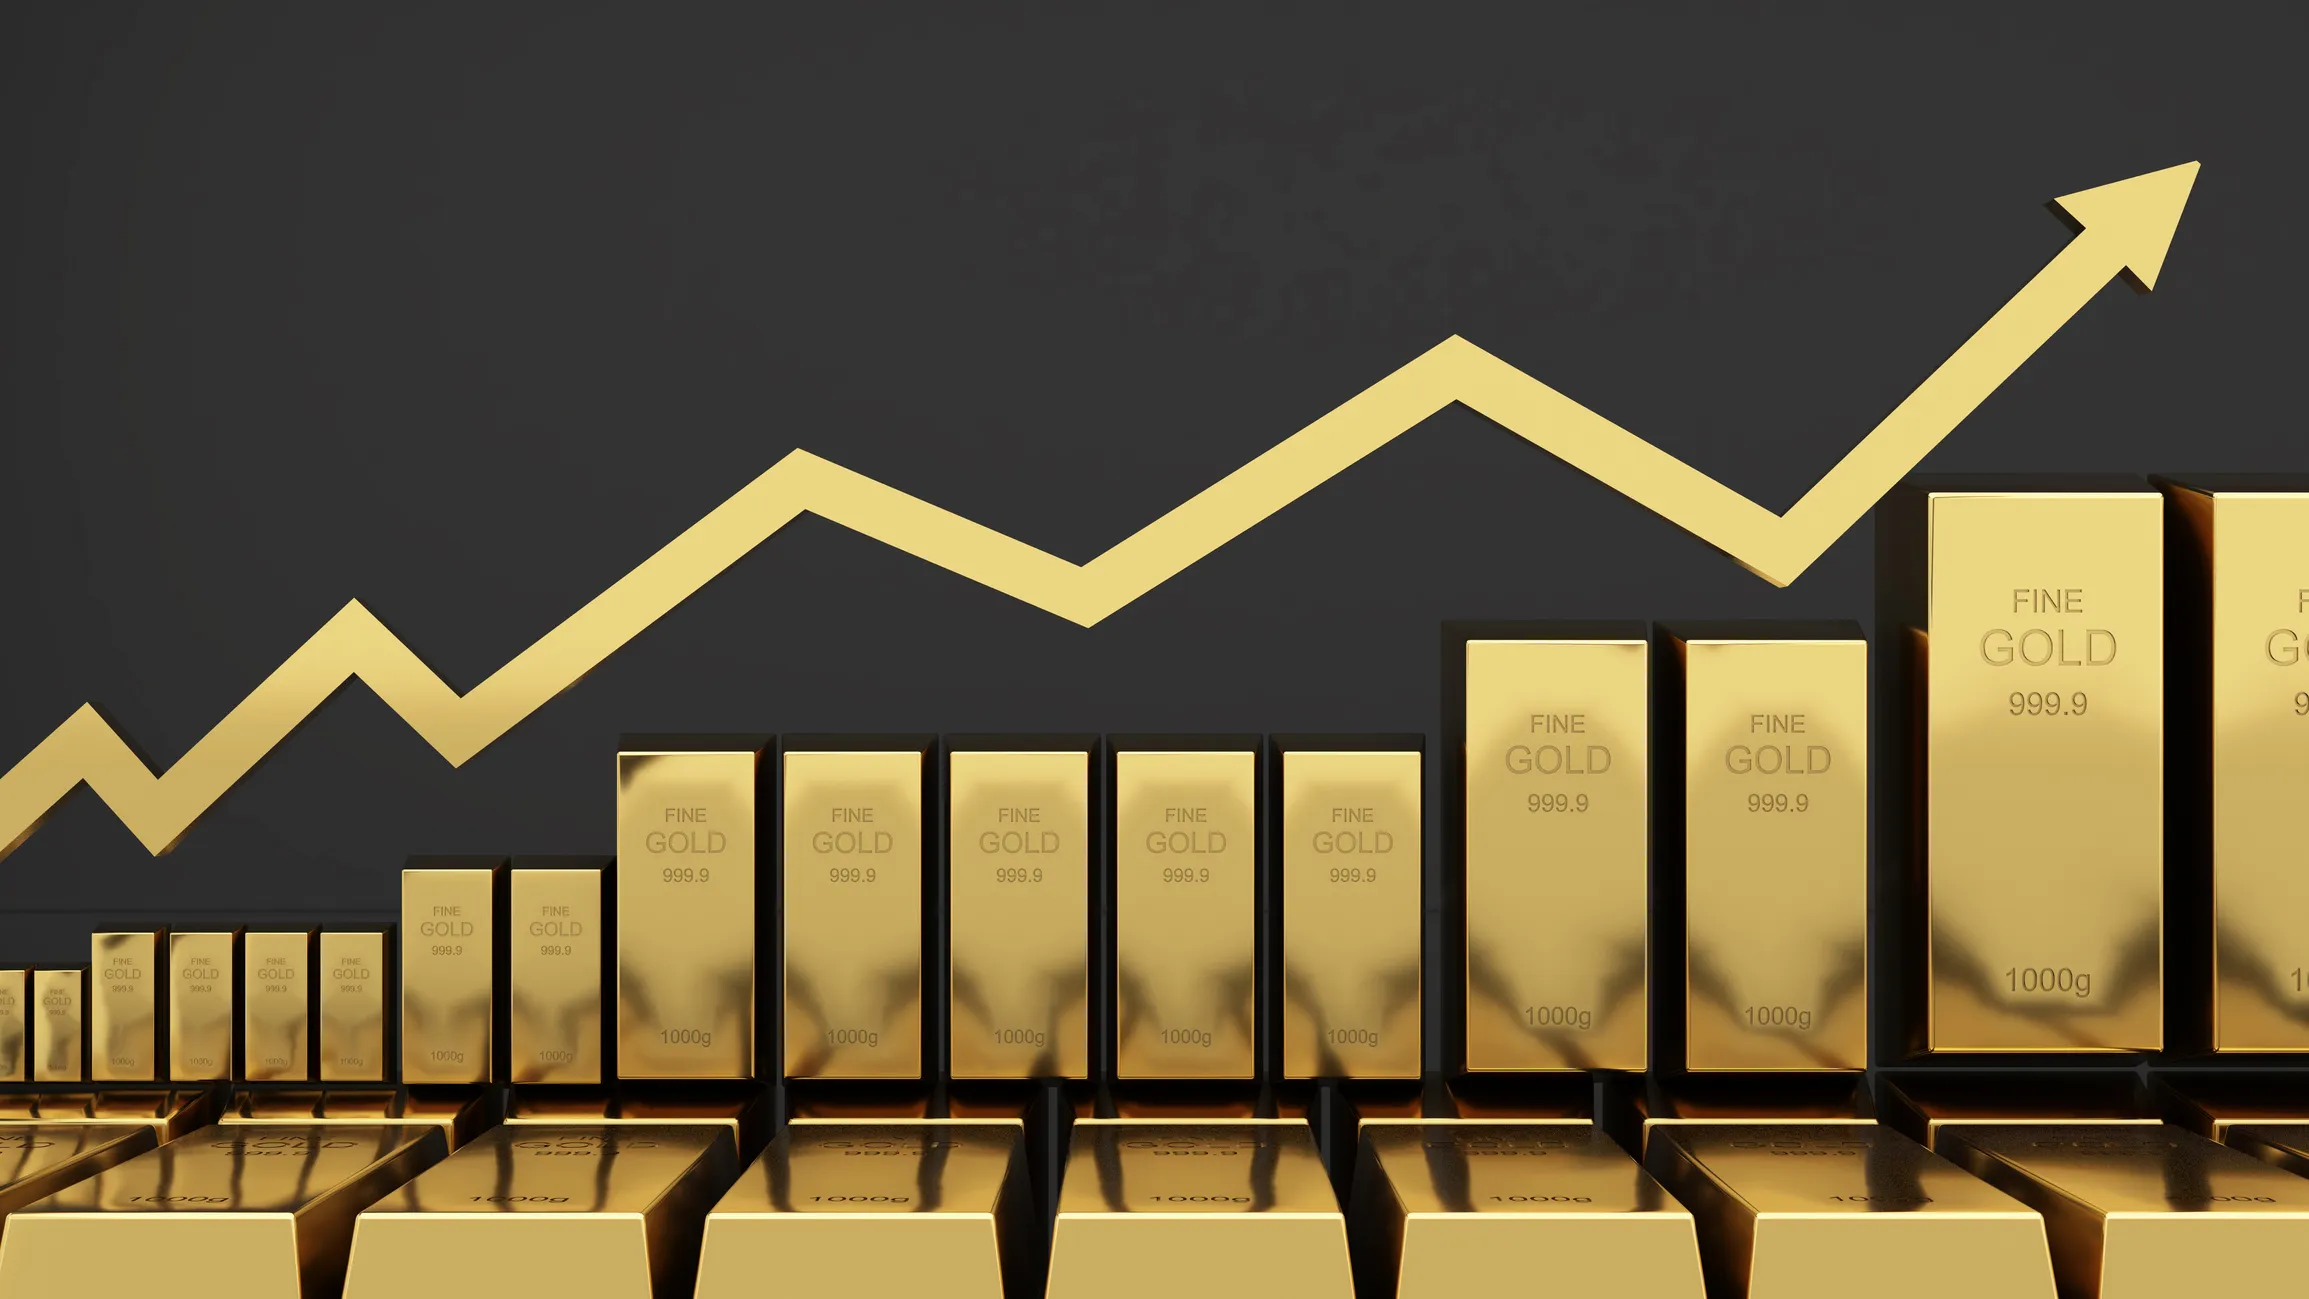 Gold bars 1000 grams pure gold,business investment and wealth concept.